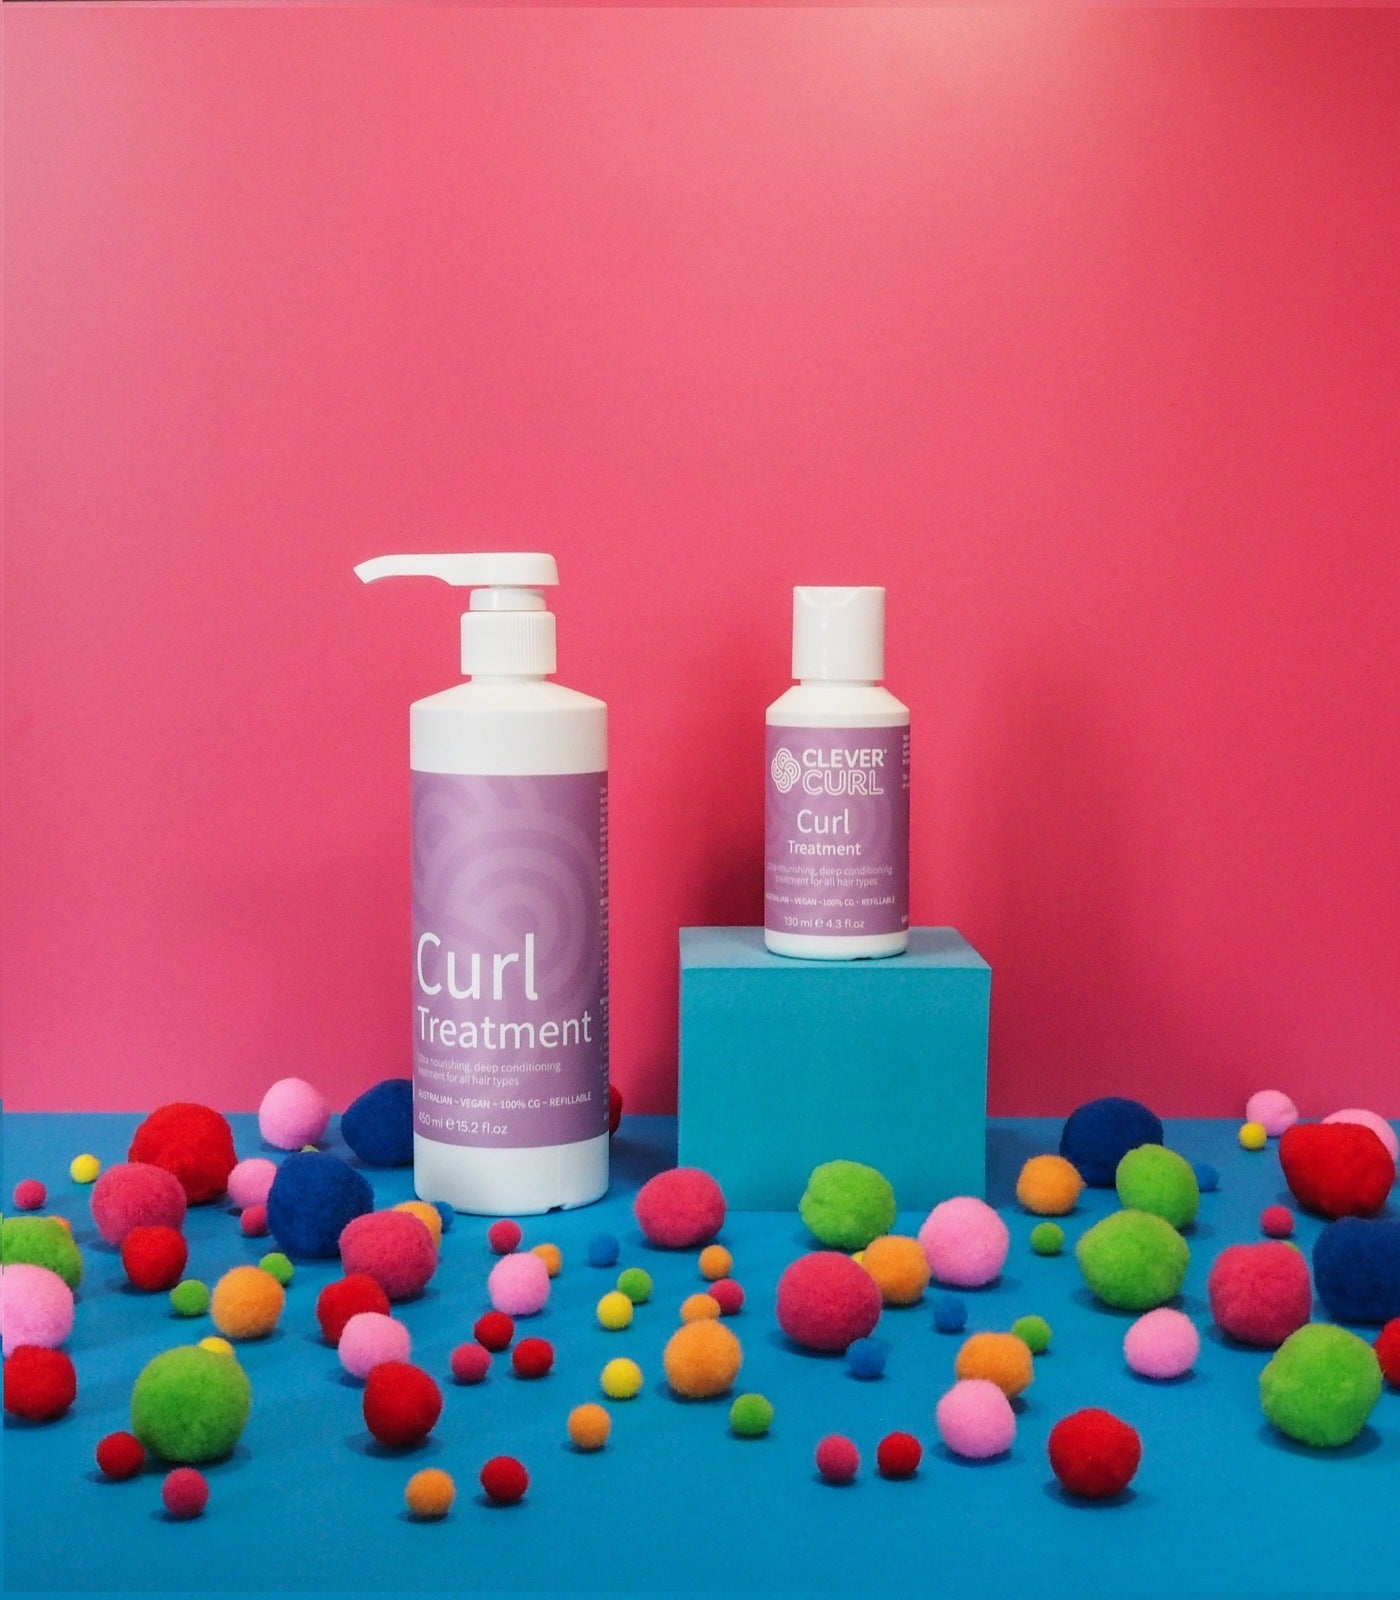 Curlytops stocks a range of Clever Curl products